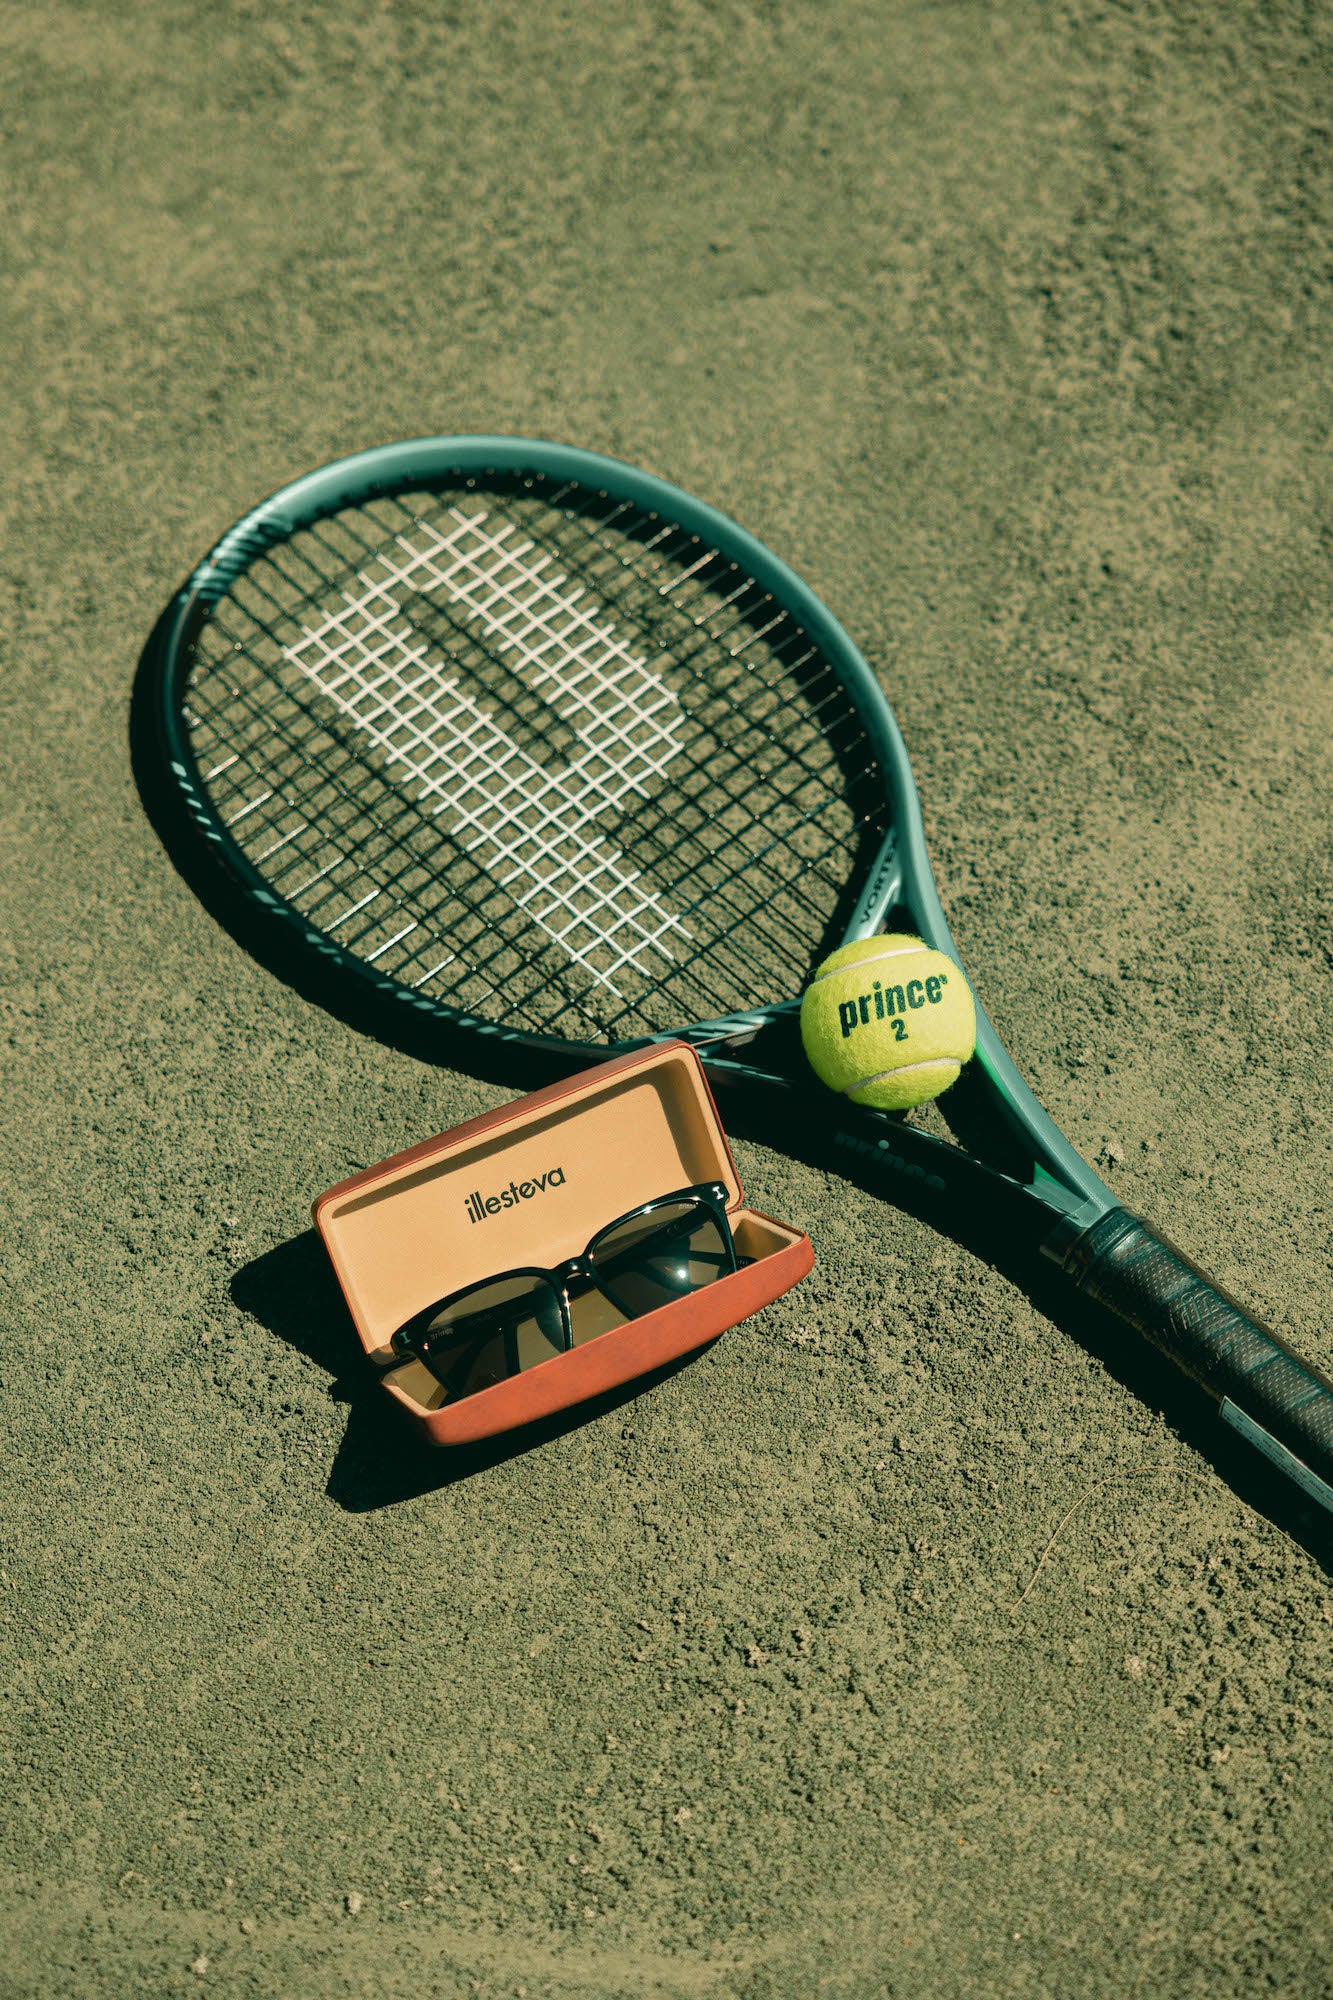 Collaboration frames in black shown next to a Prince tennis racket and tennis ball